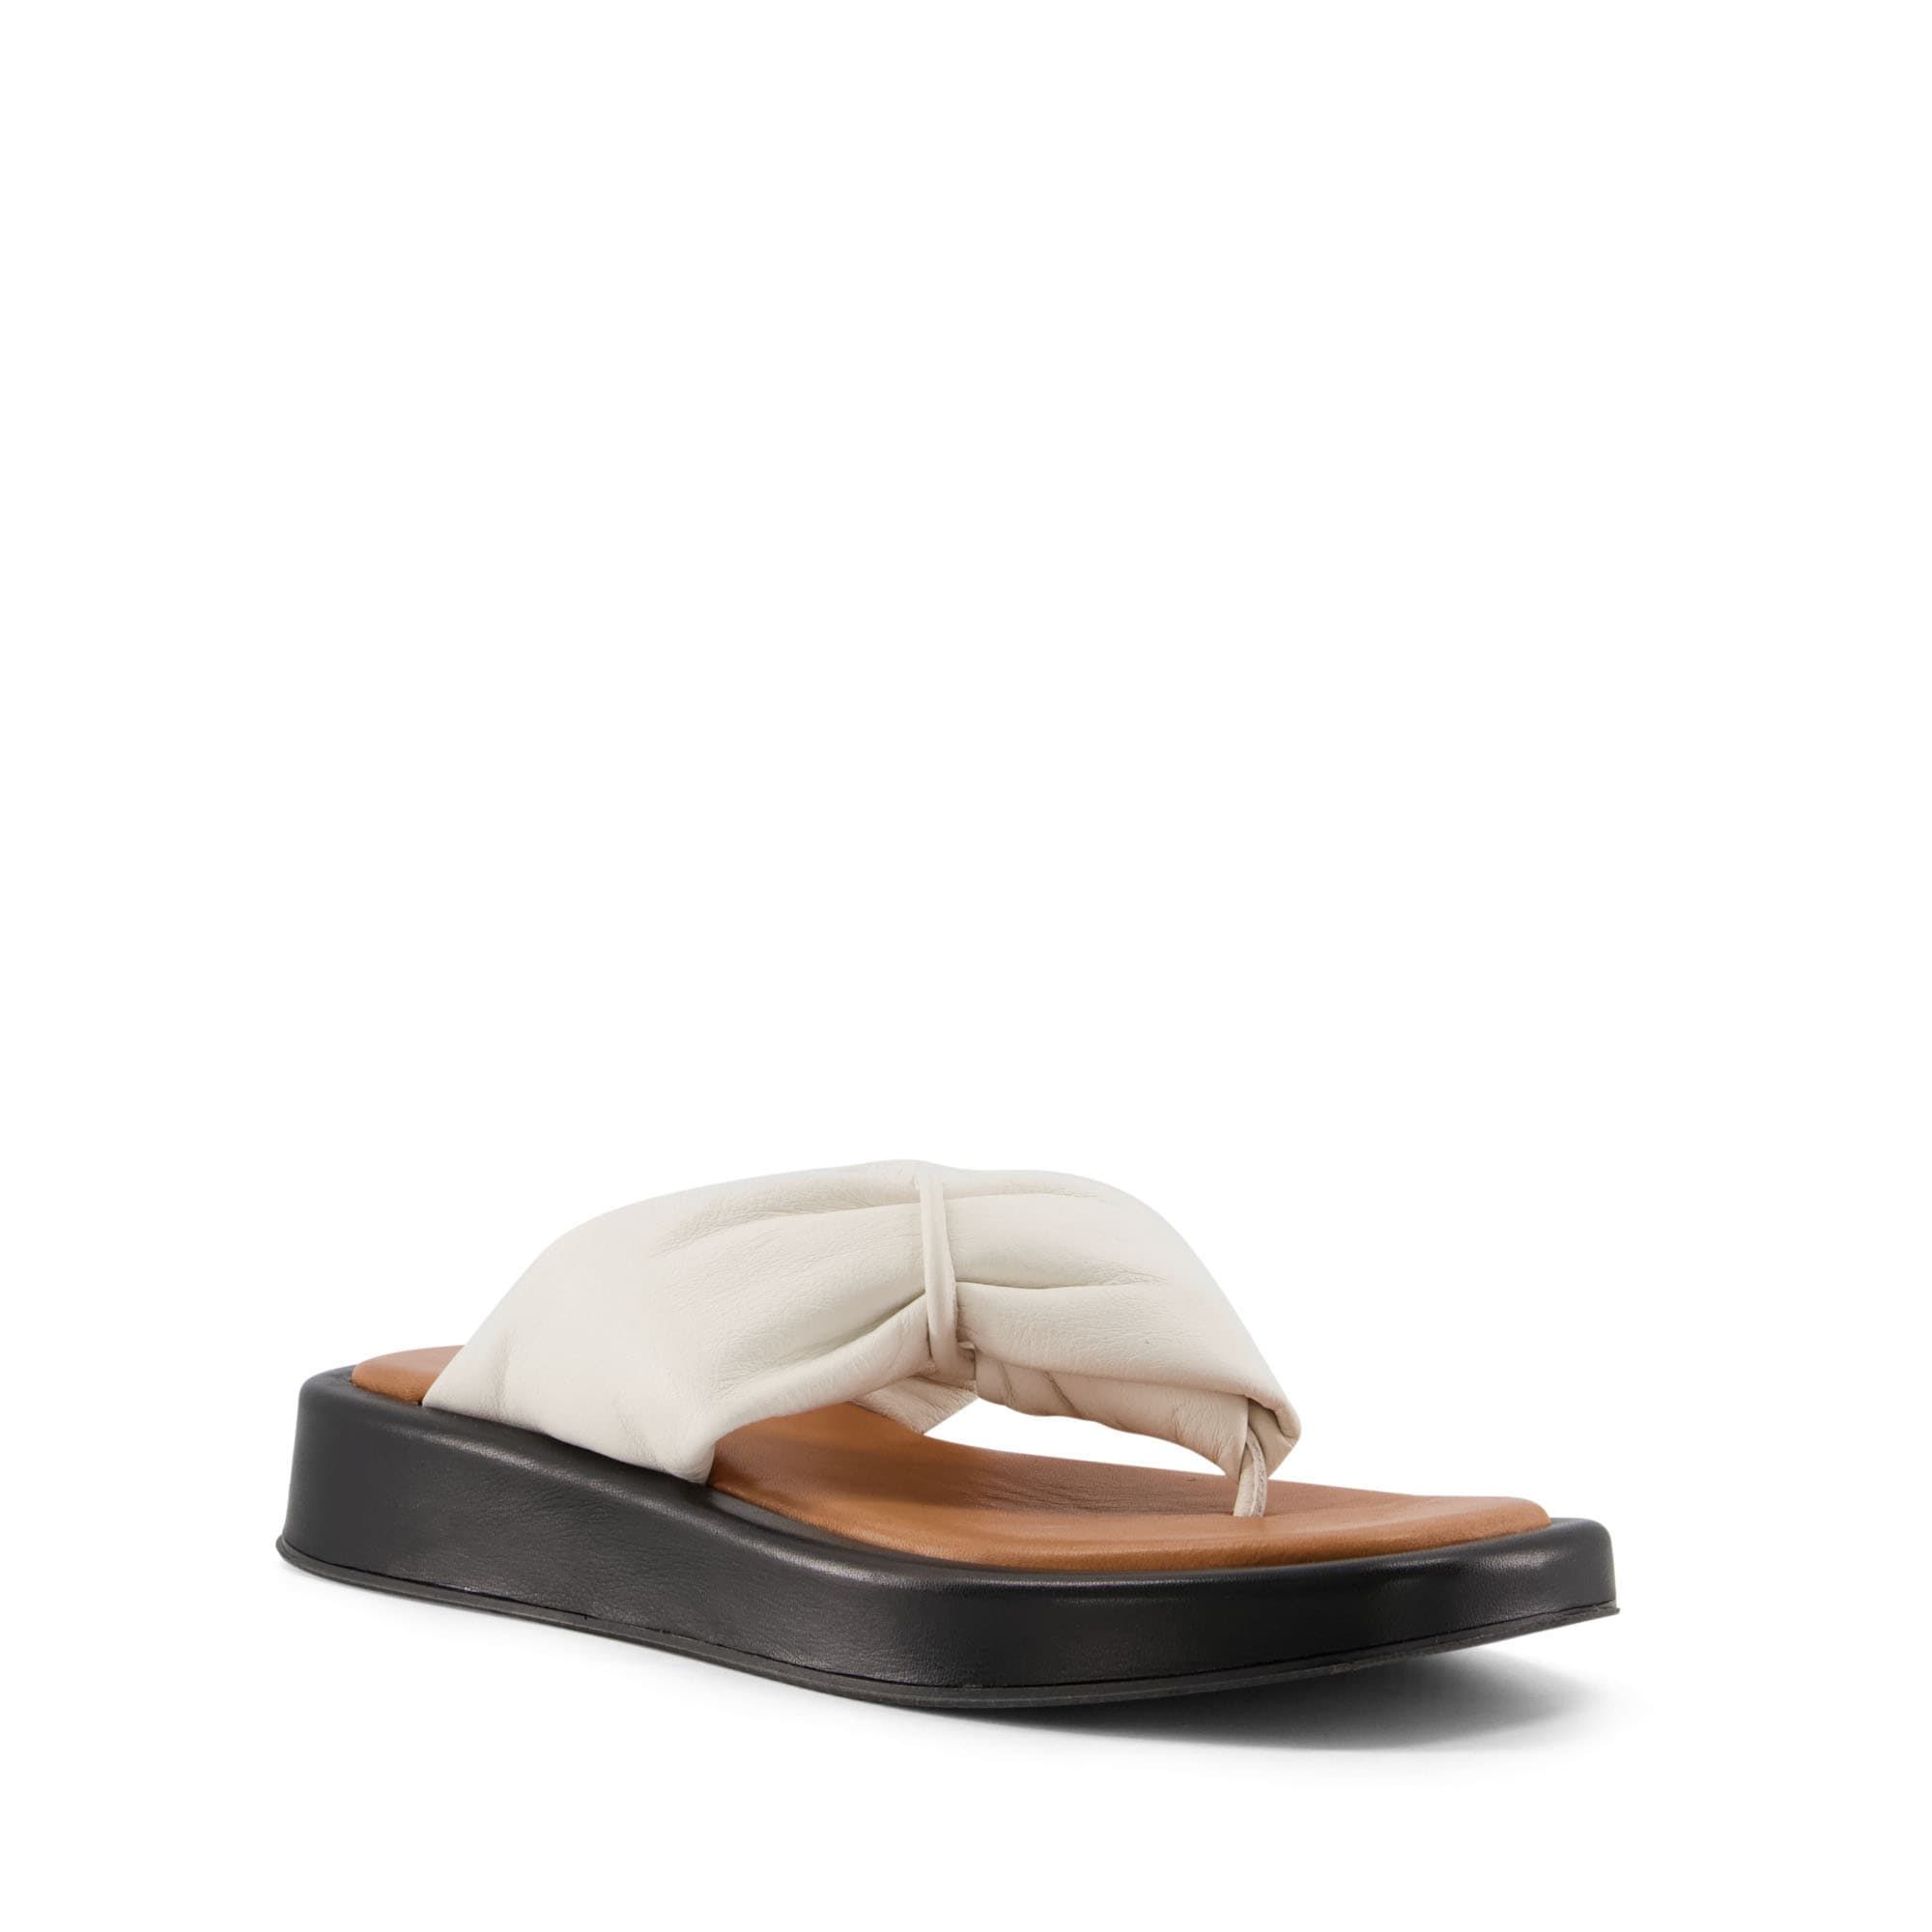 We see you, summer. The perfect combination of cool and comfortable, these sandals have been designed with padded footbeds and soft leather straps. A warm weather must-have.